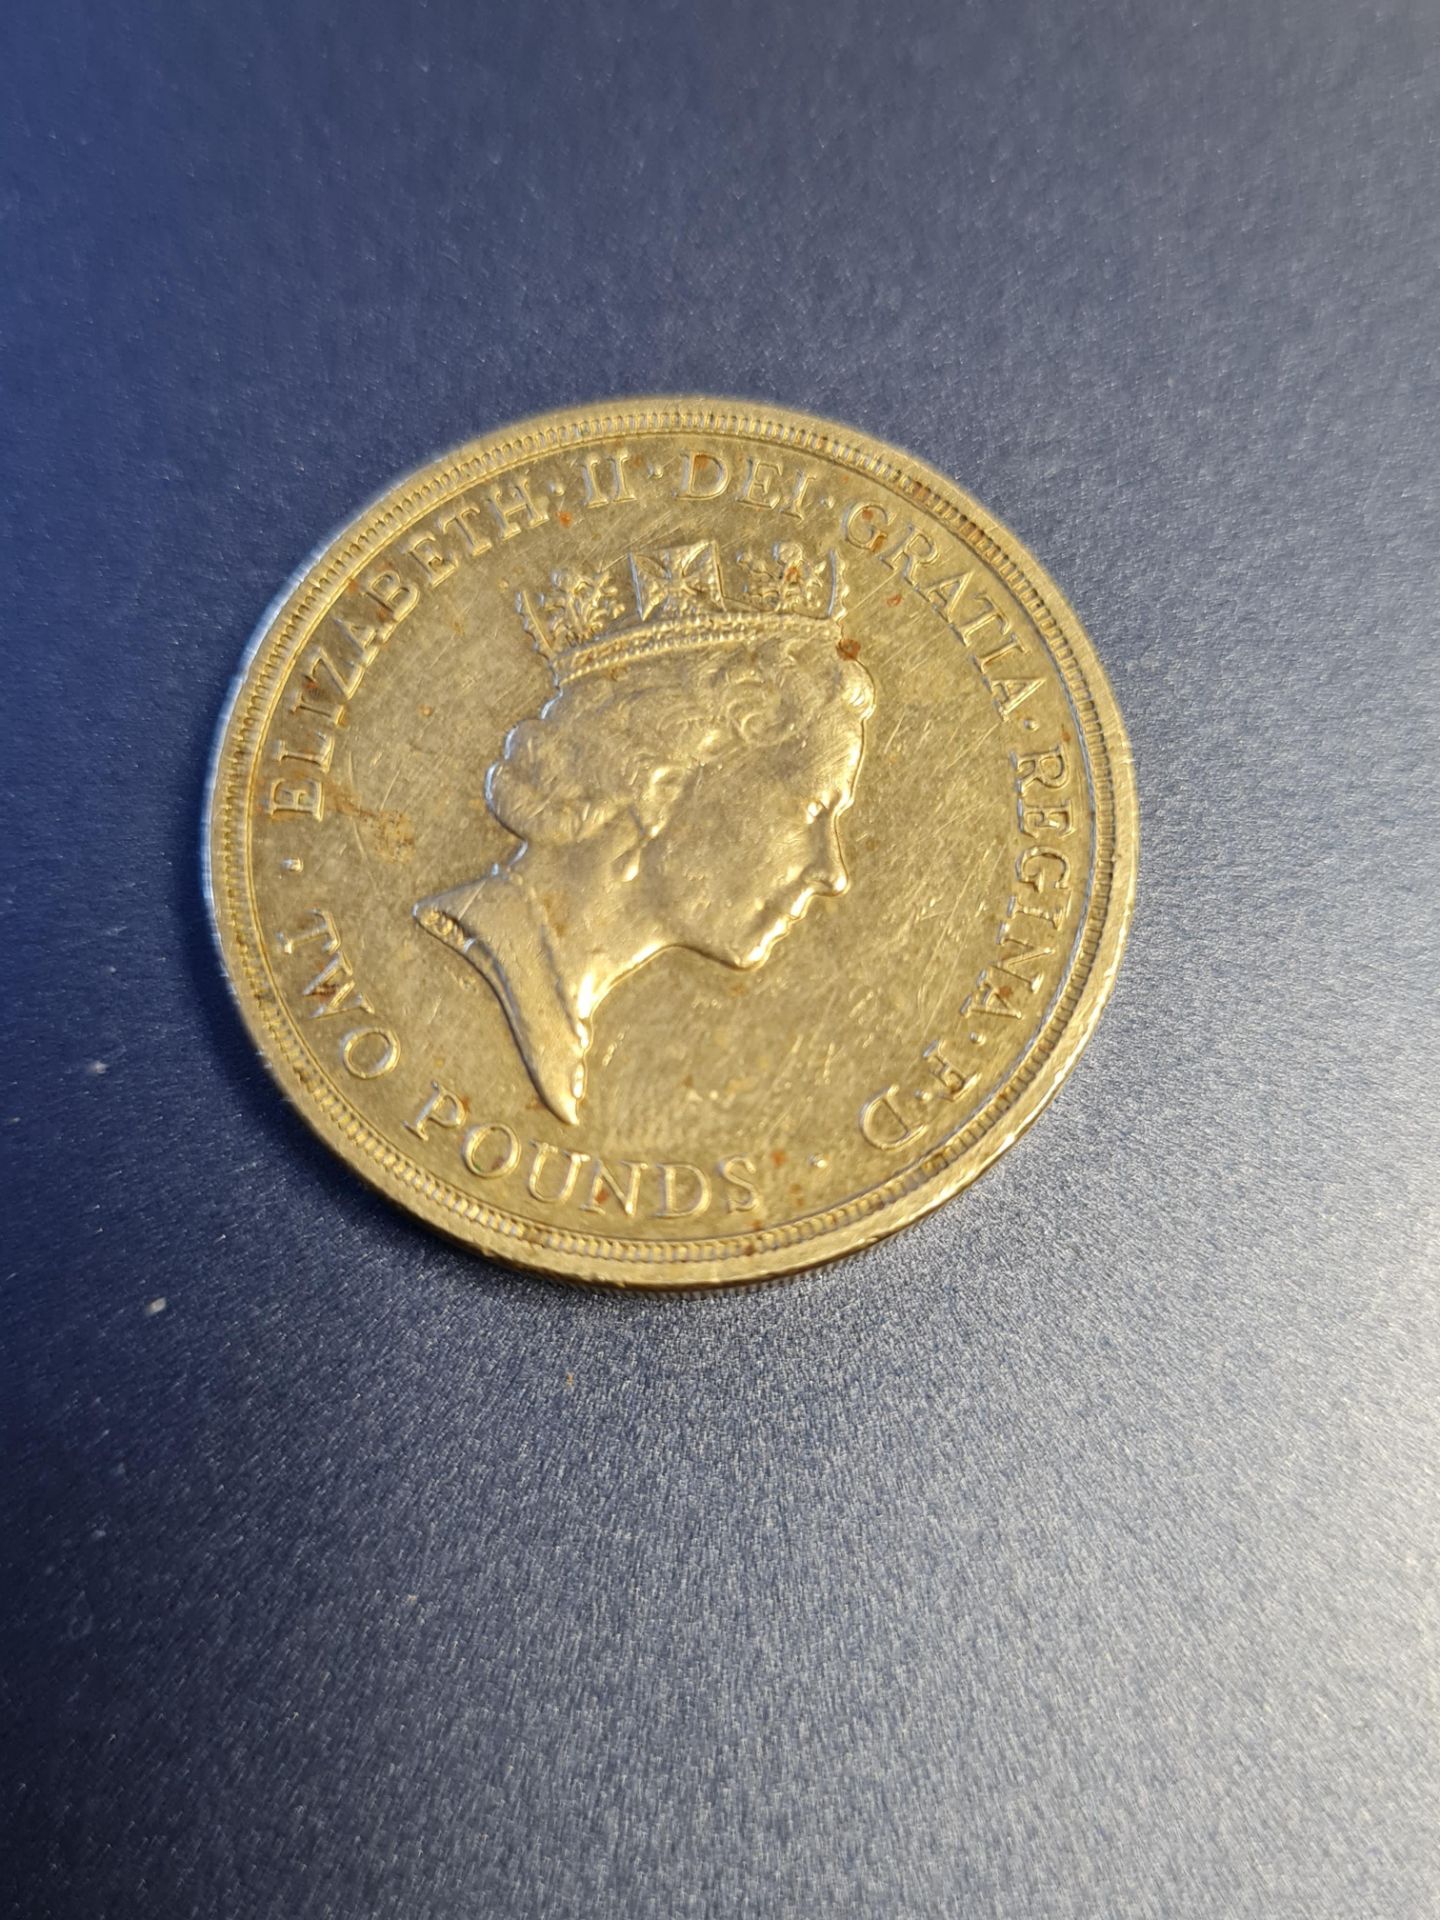 United Nations old £2 coin - Image 2 of 2